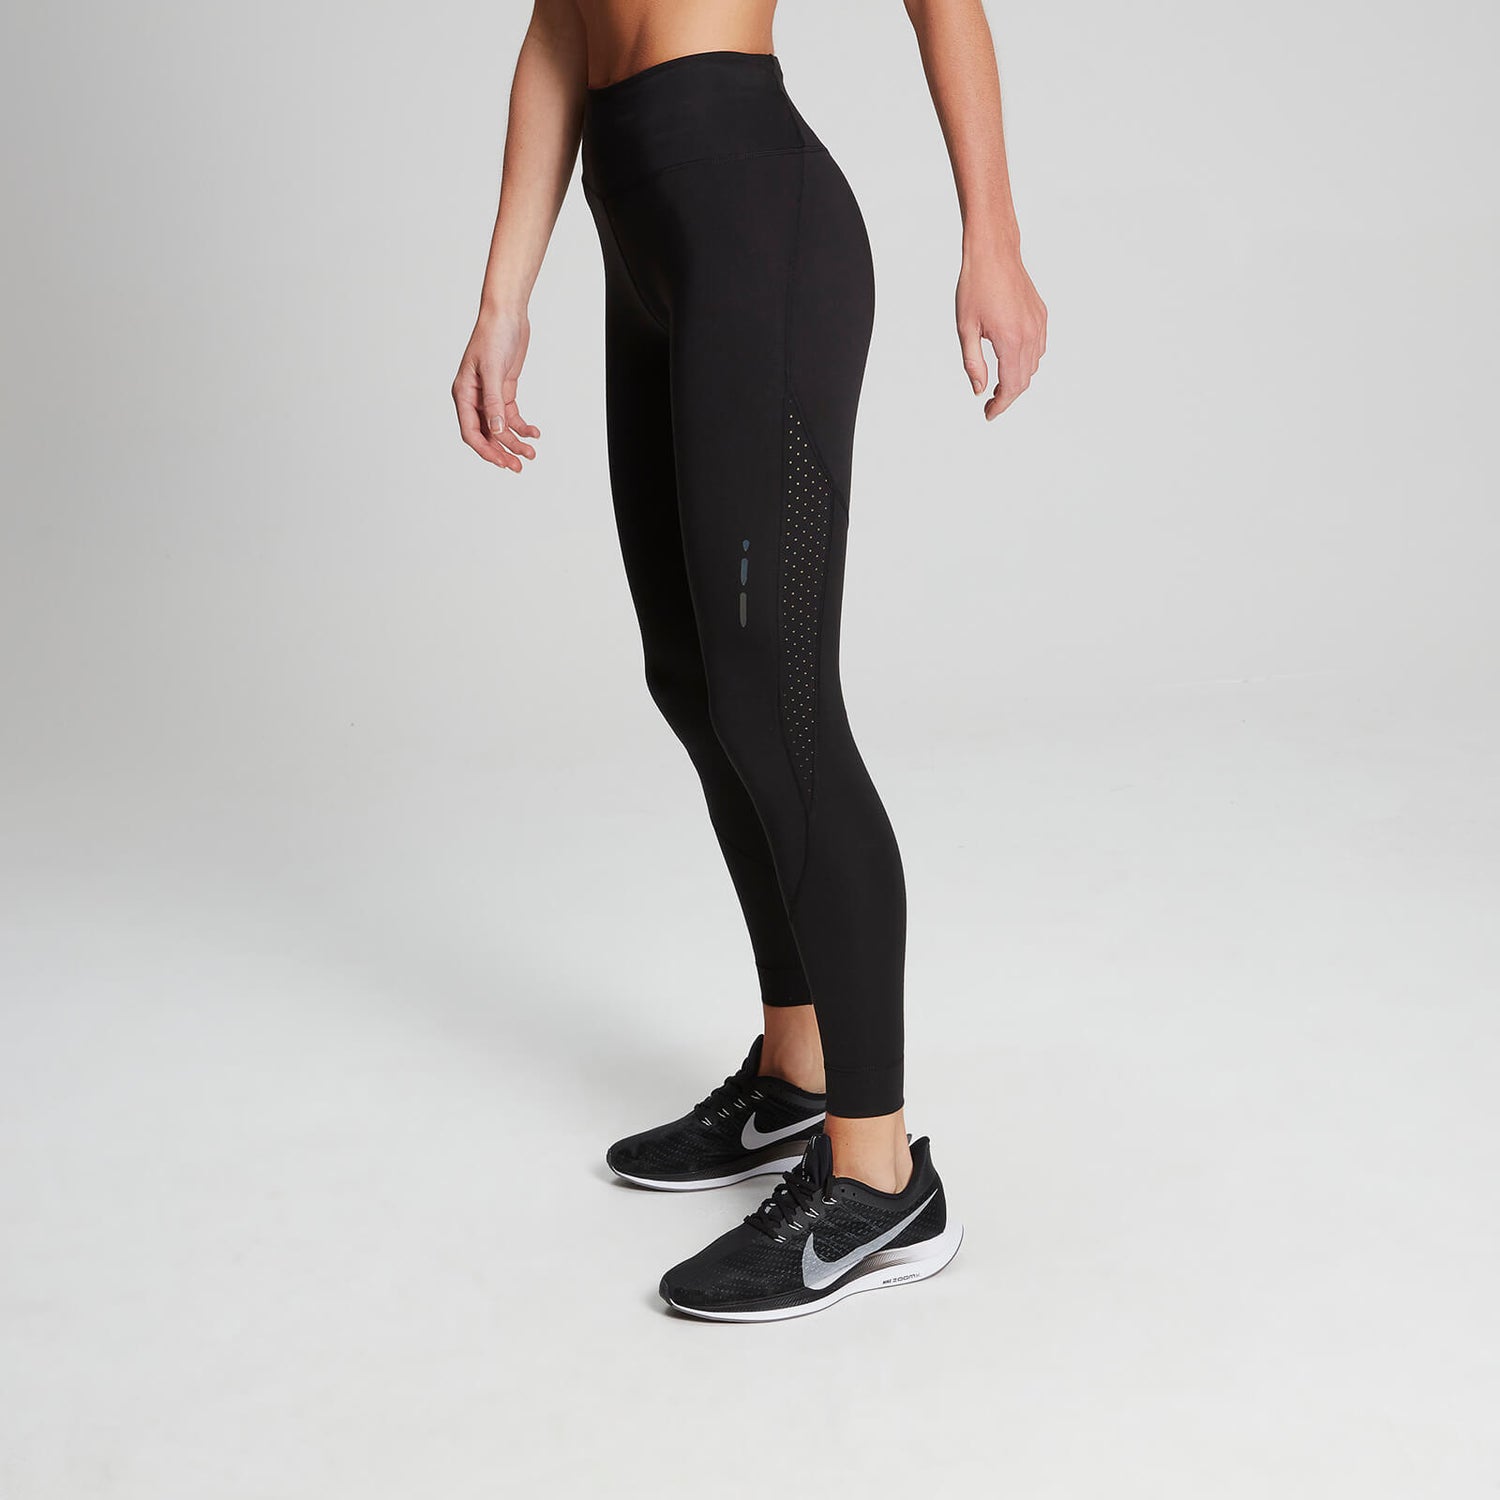 Blue Life Fit Perforated Contrast Legging 